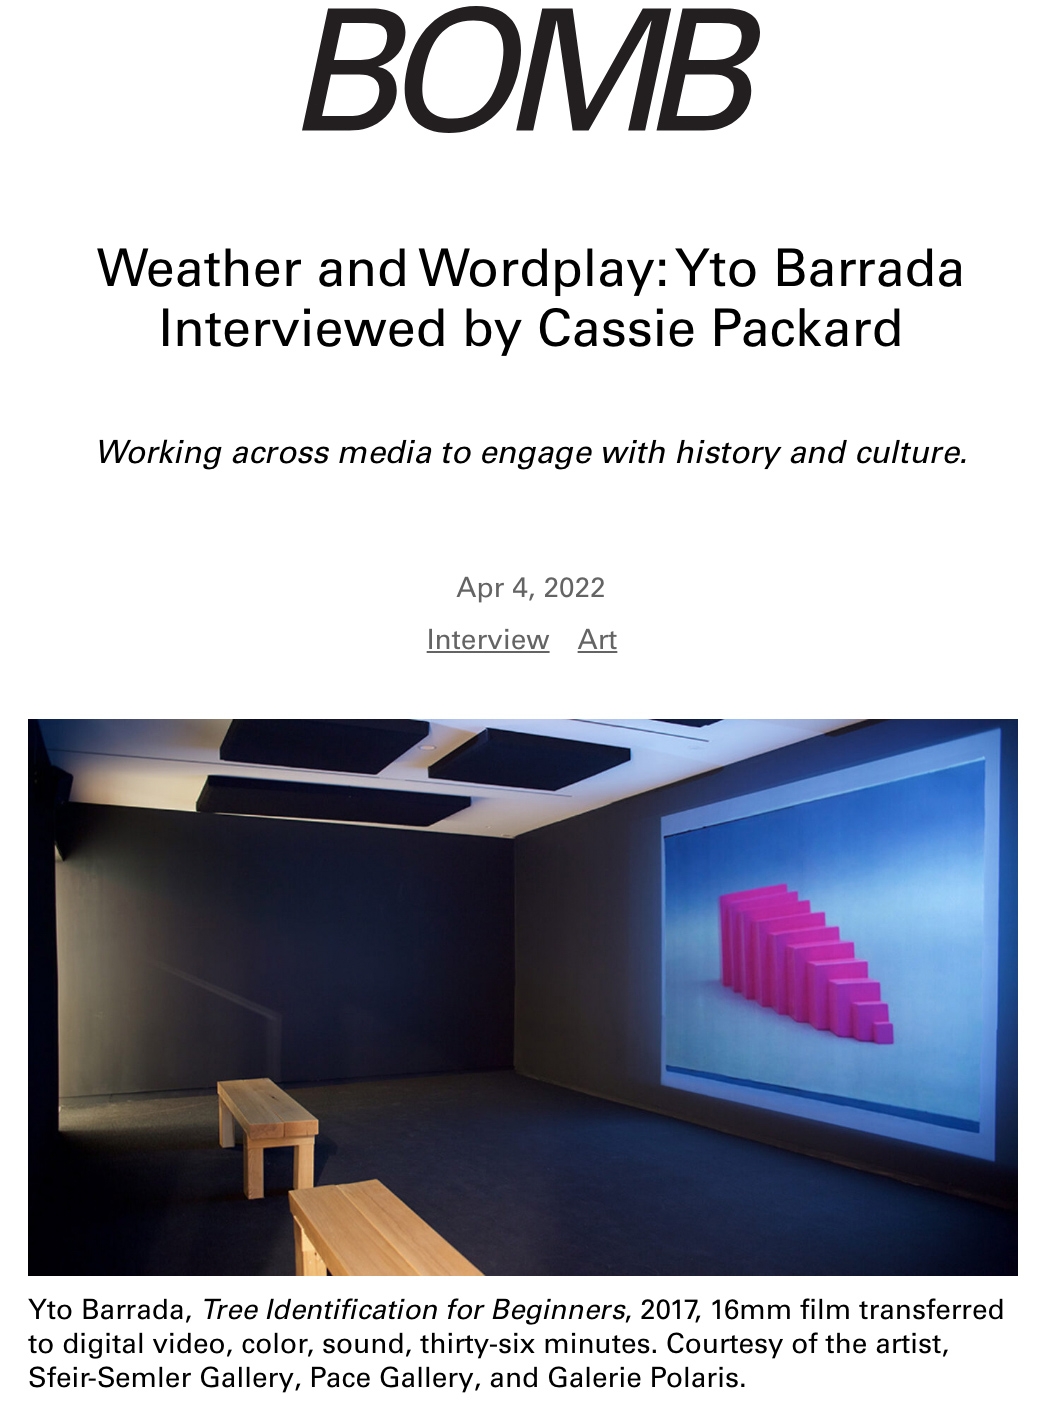 "Weather and Wordplay: Yto Barrada Interviewed by Cassie Packard" | via BOMBmagazine, published April 4, 2022